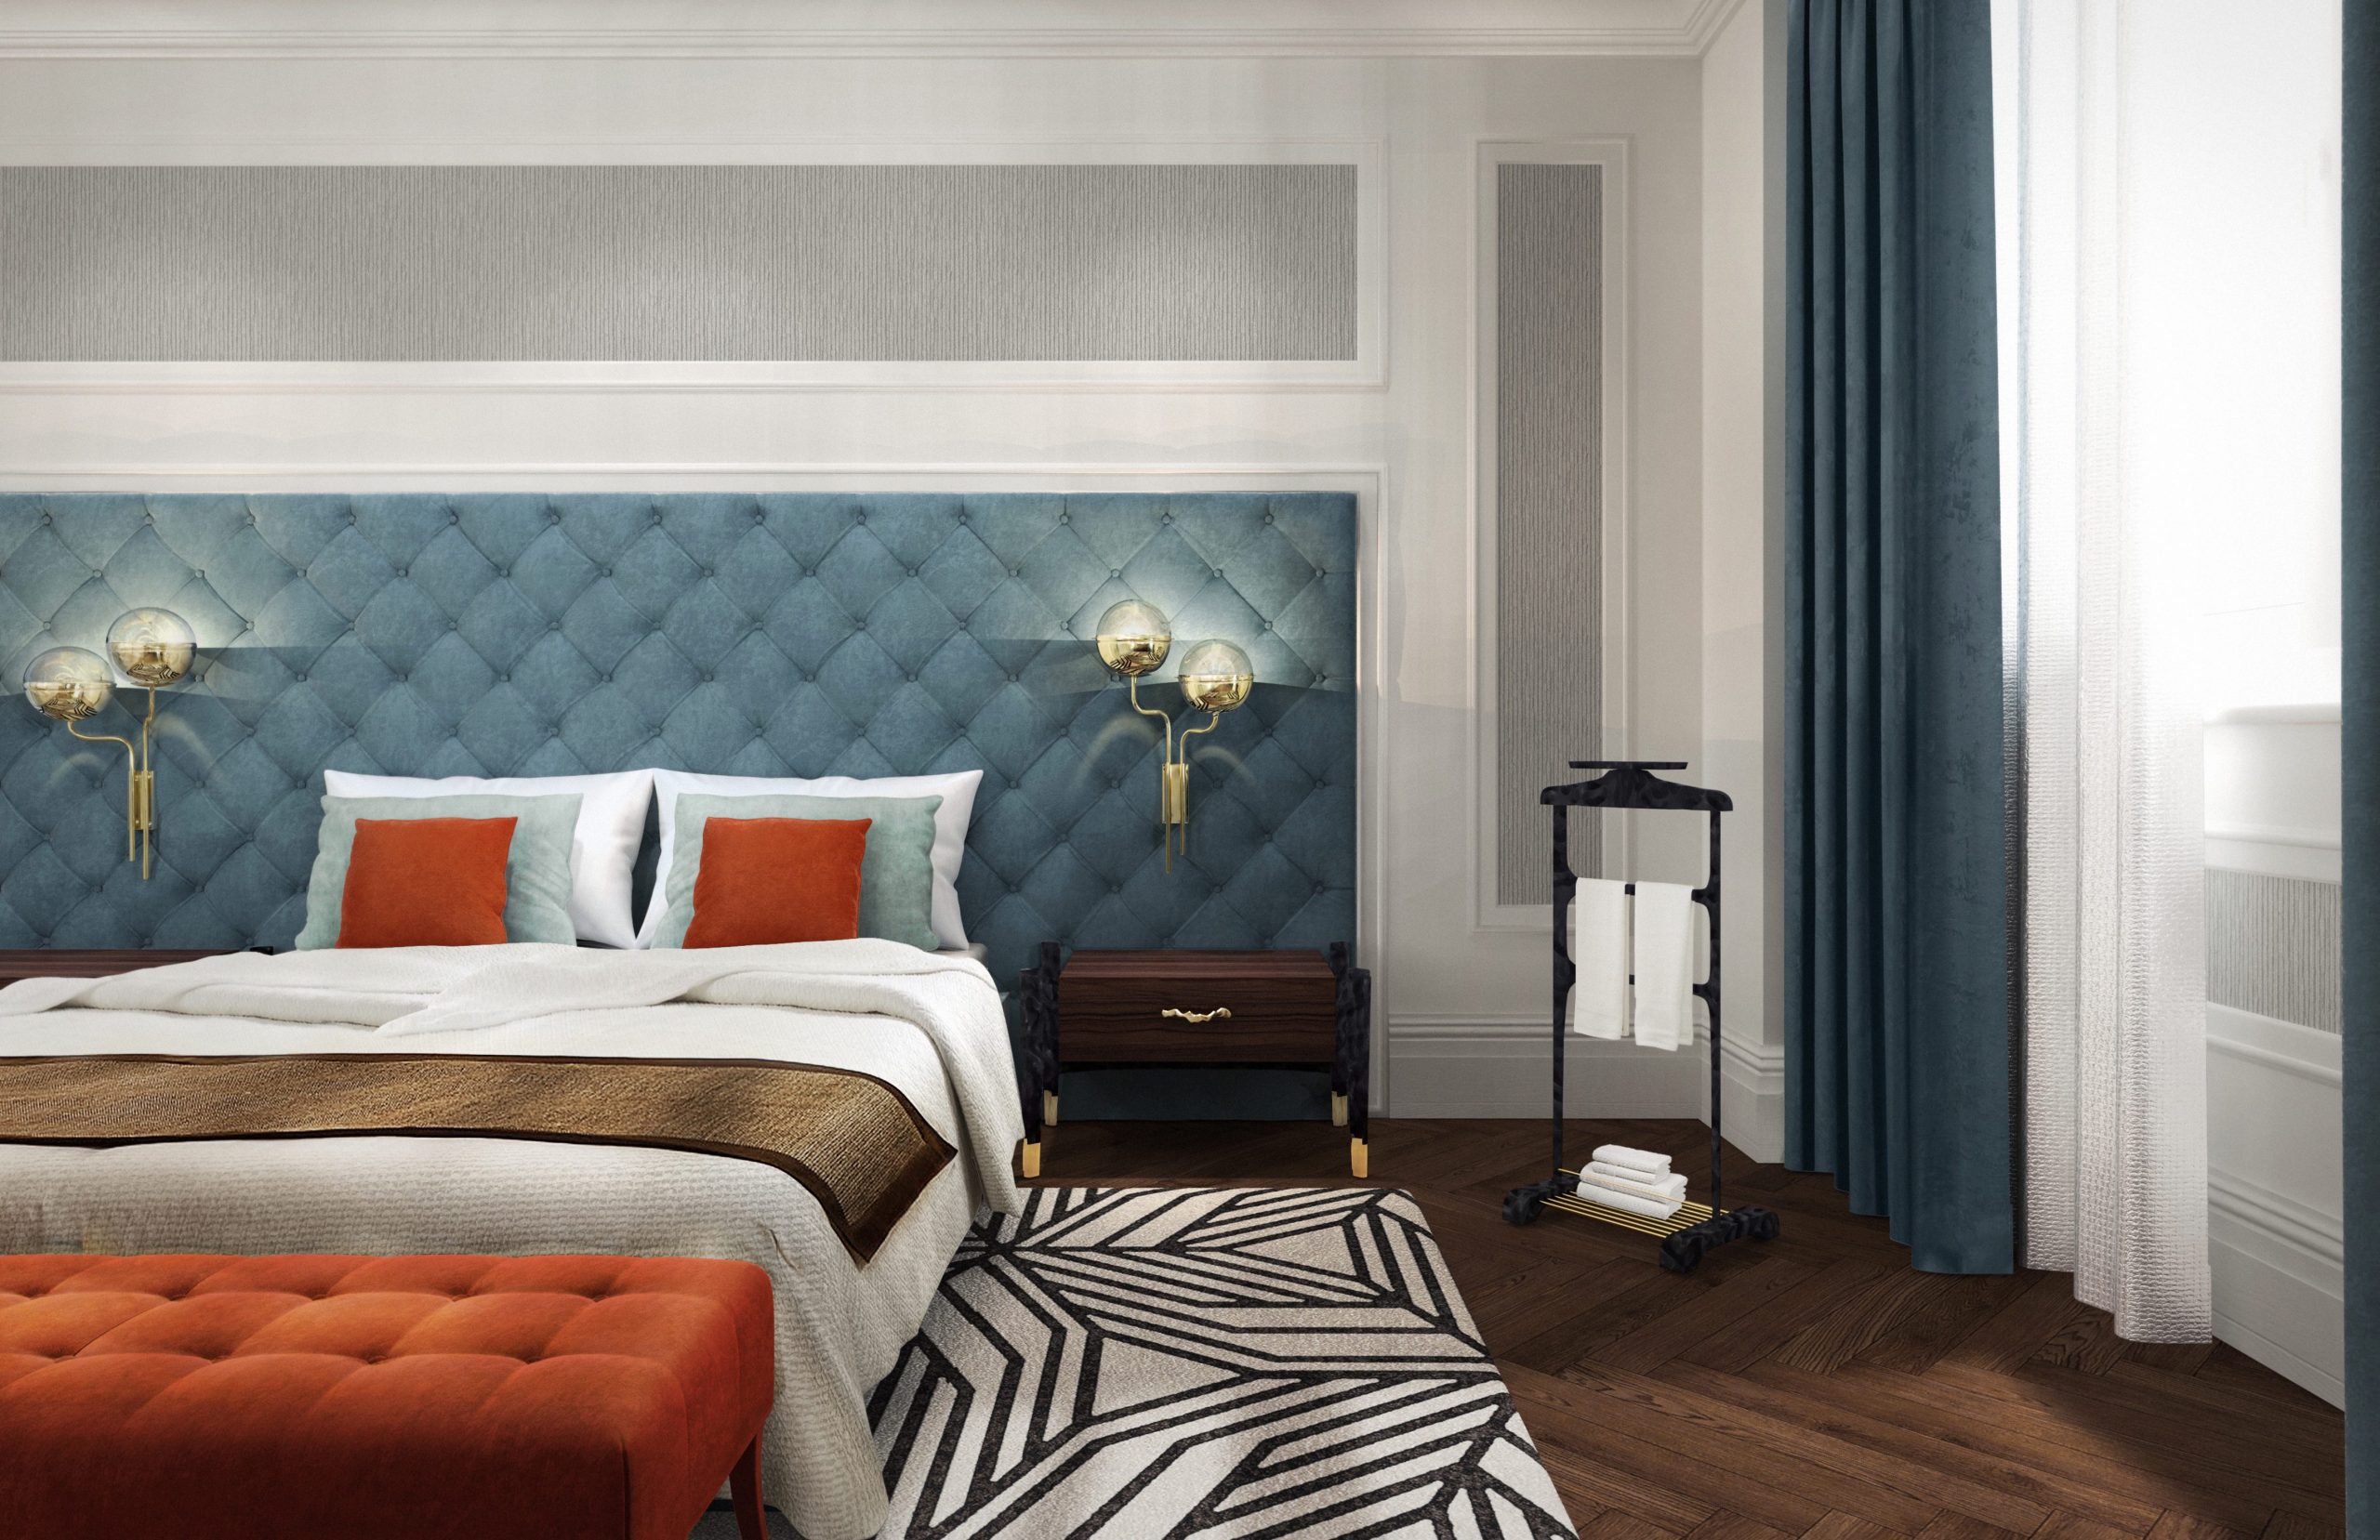 We Have Modern Ideas For You Create Sophisticated Luxury Rooms